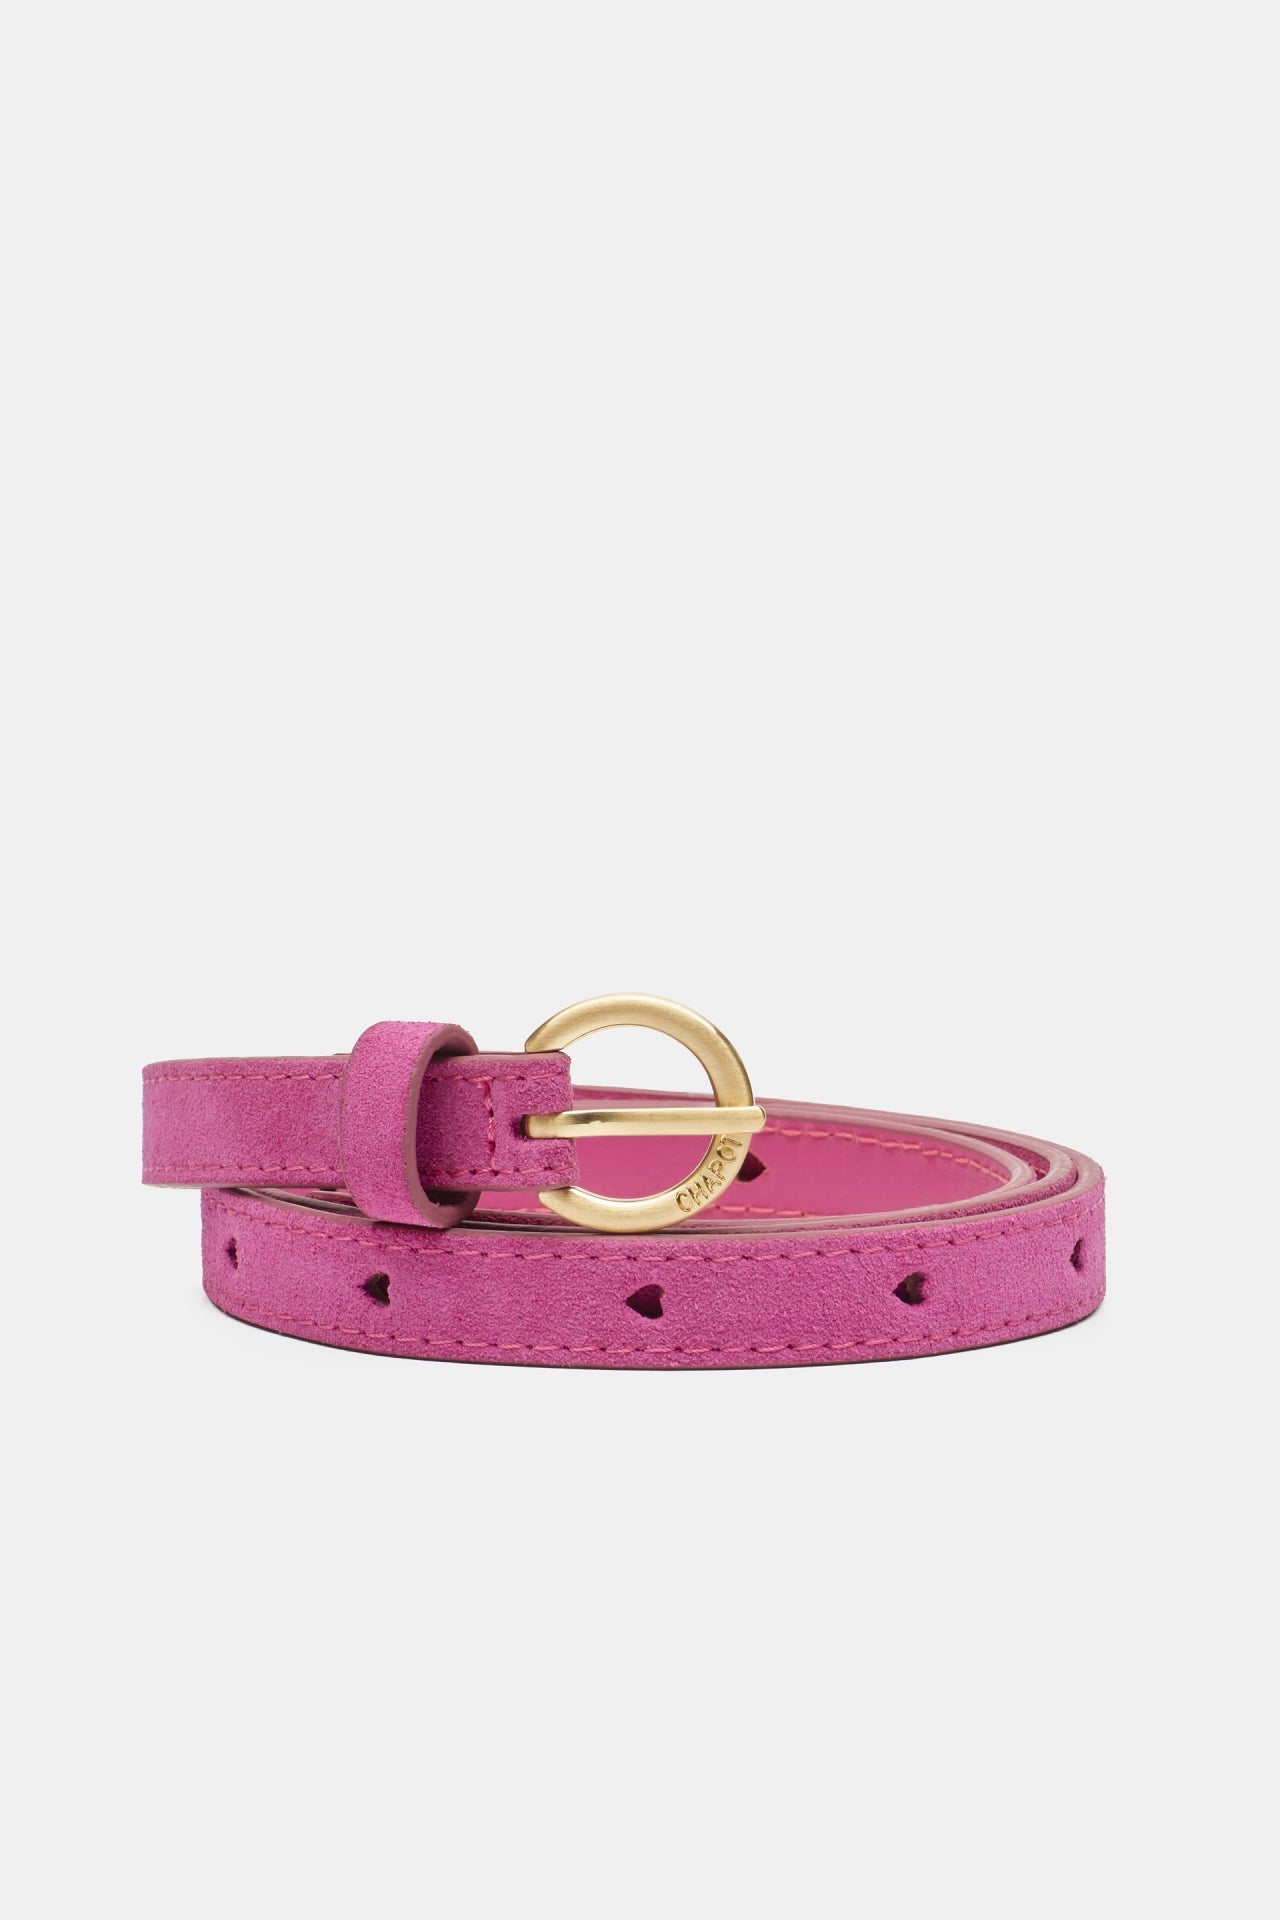 Cut It Out Small Heart Belt | Plum Party